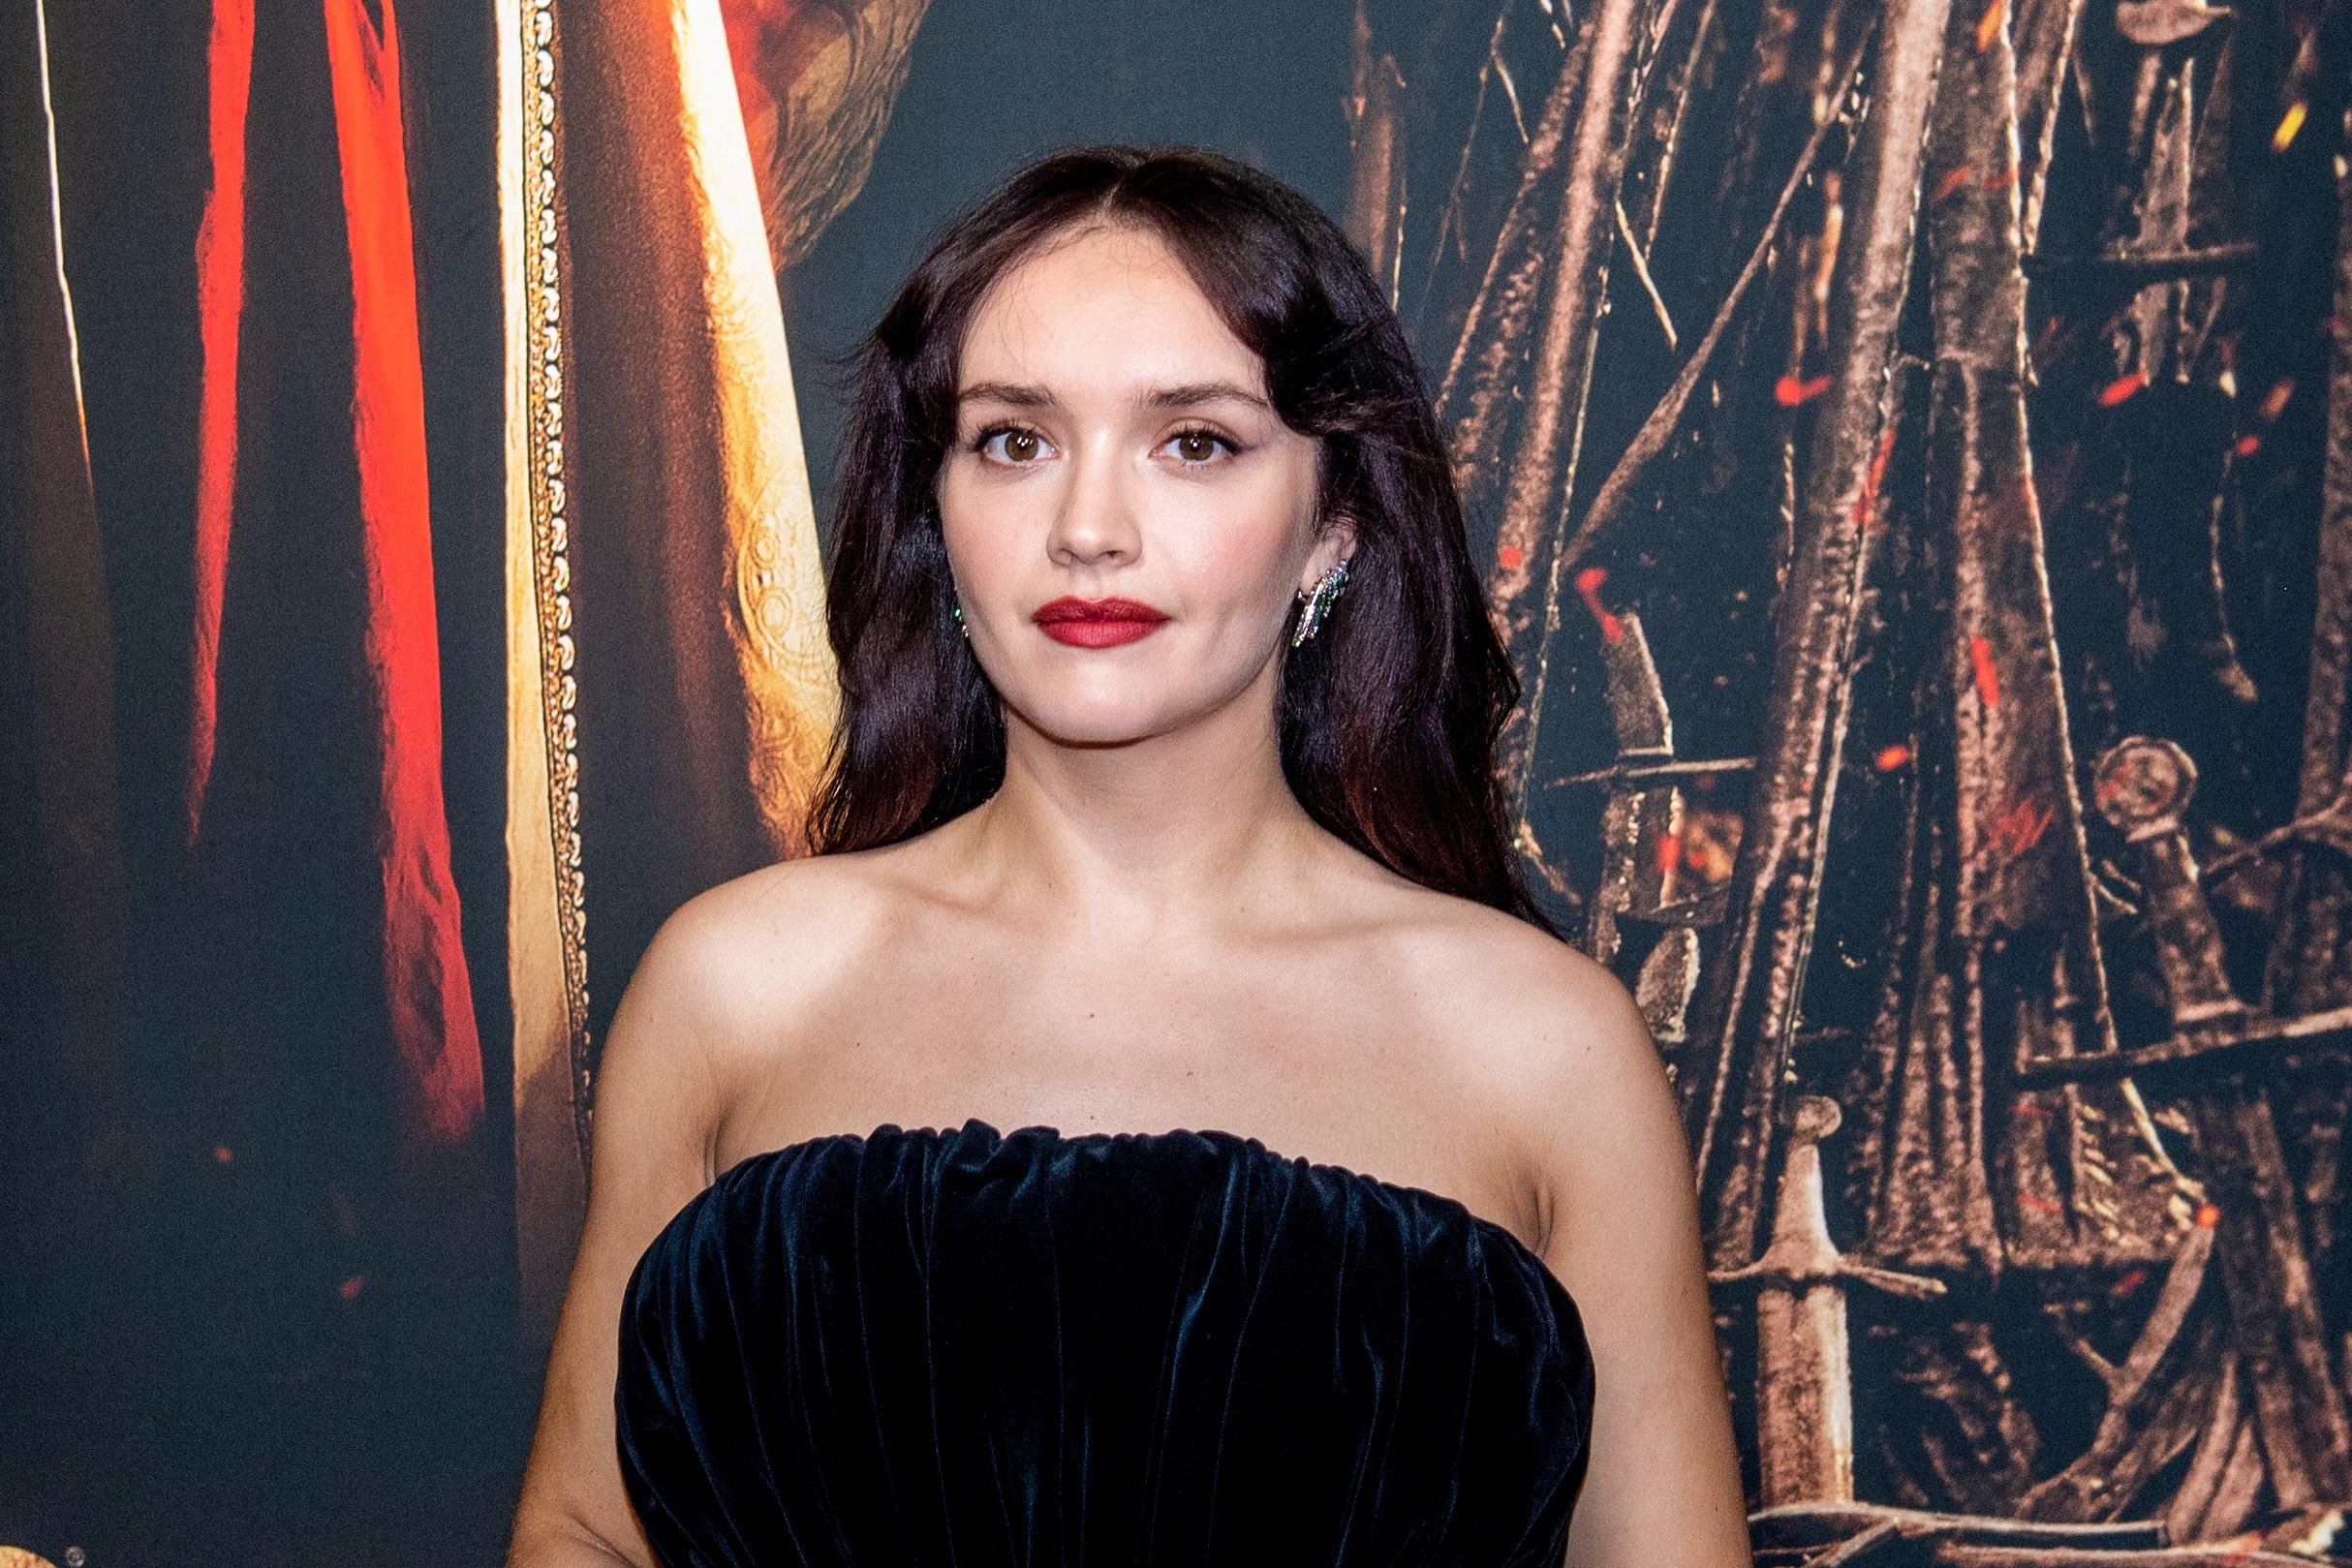 House of the Dragon European premiere at Beurs van Berlage in Amsterdam. 11 Aug 2022 Pictured: Olivia Cooke 